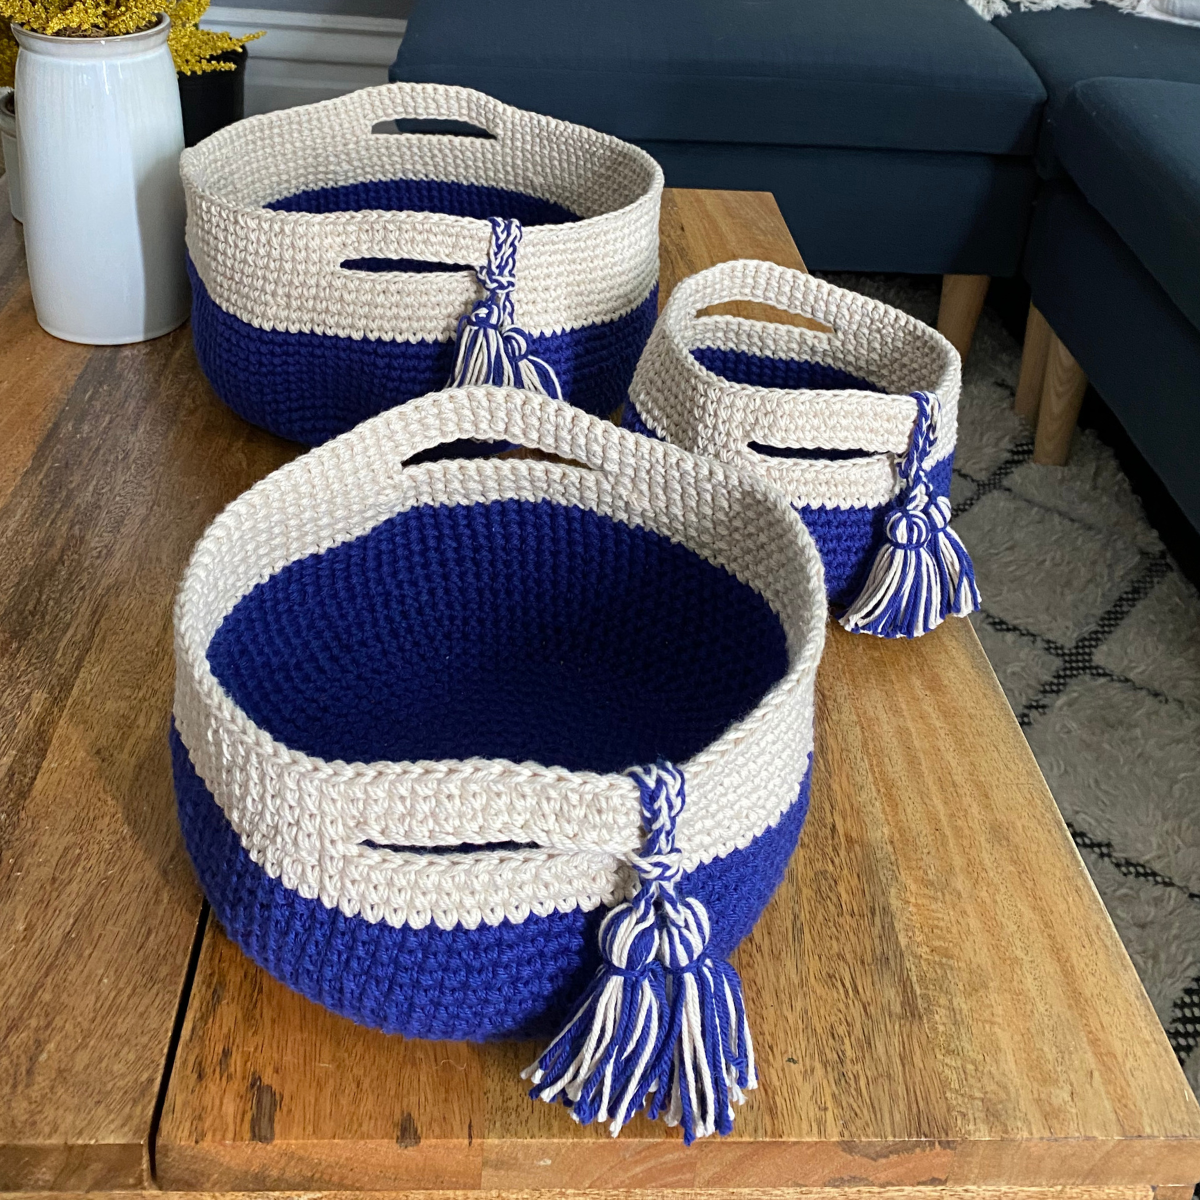 A set of three baskets crocheted from Cascade Yarns Nifty Cotton in Sapphire and Buff is shown.